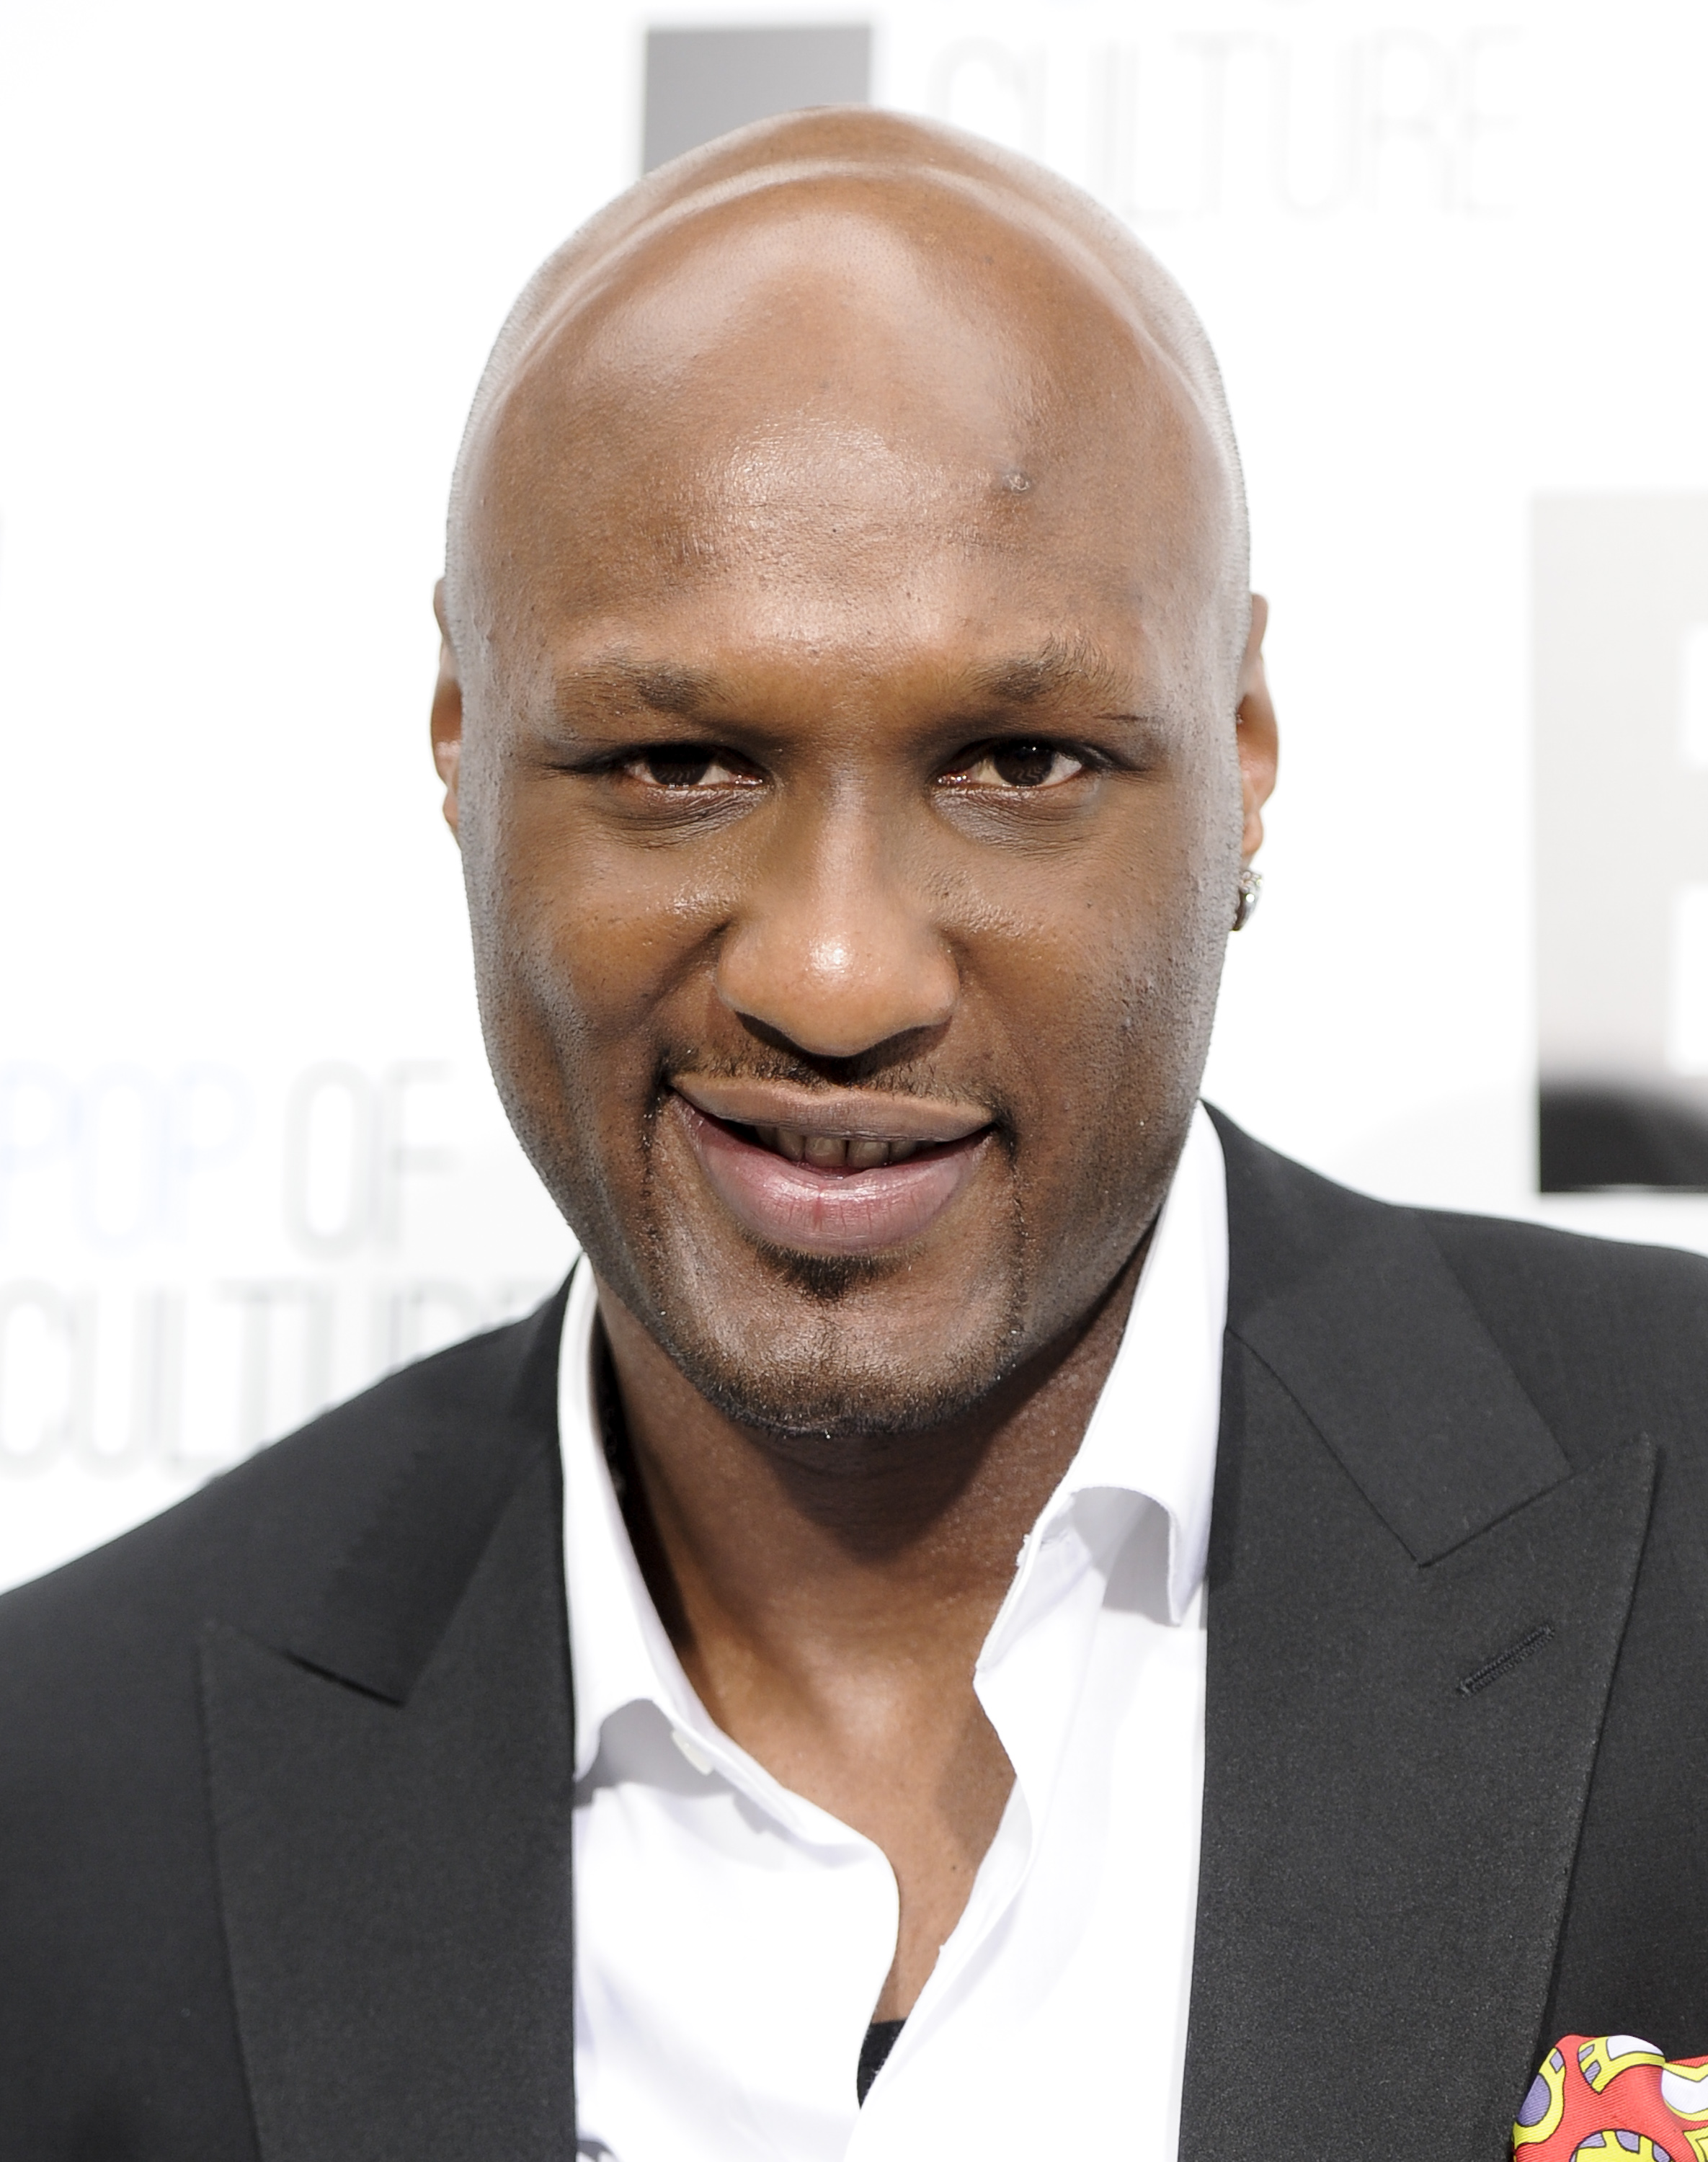 Lamar Odom's Life "Will Never Be the Same.